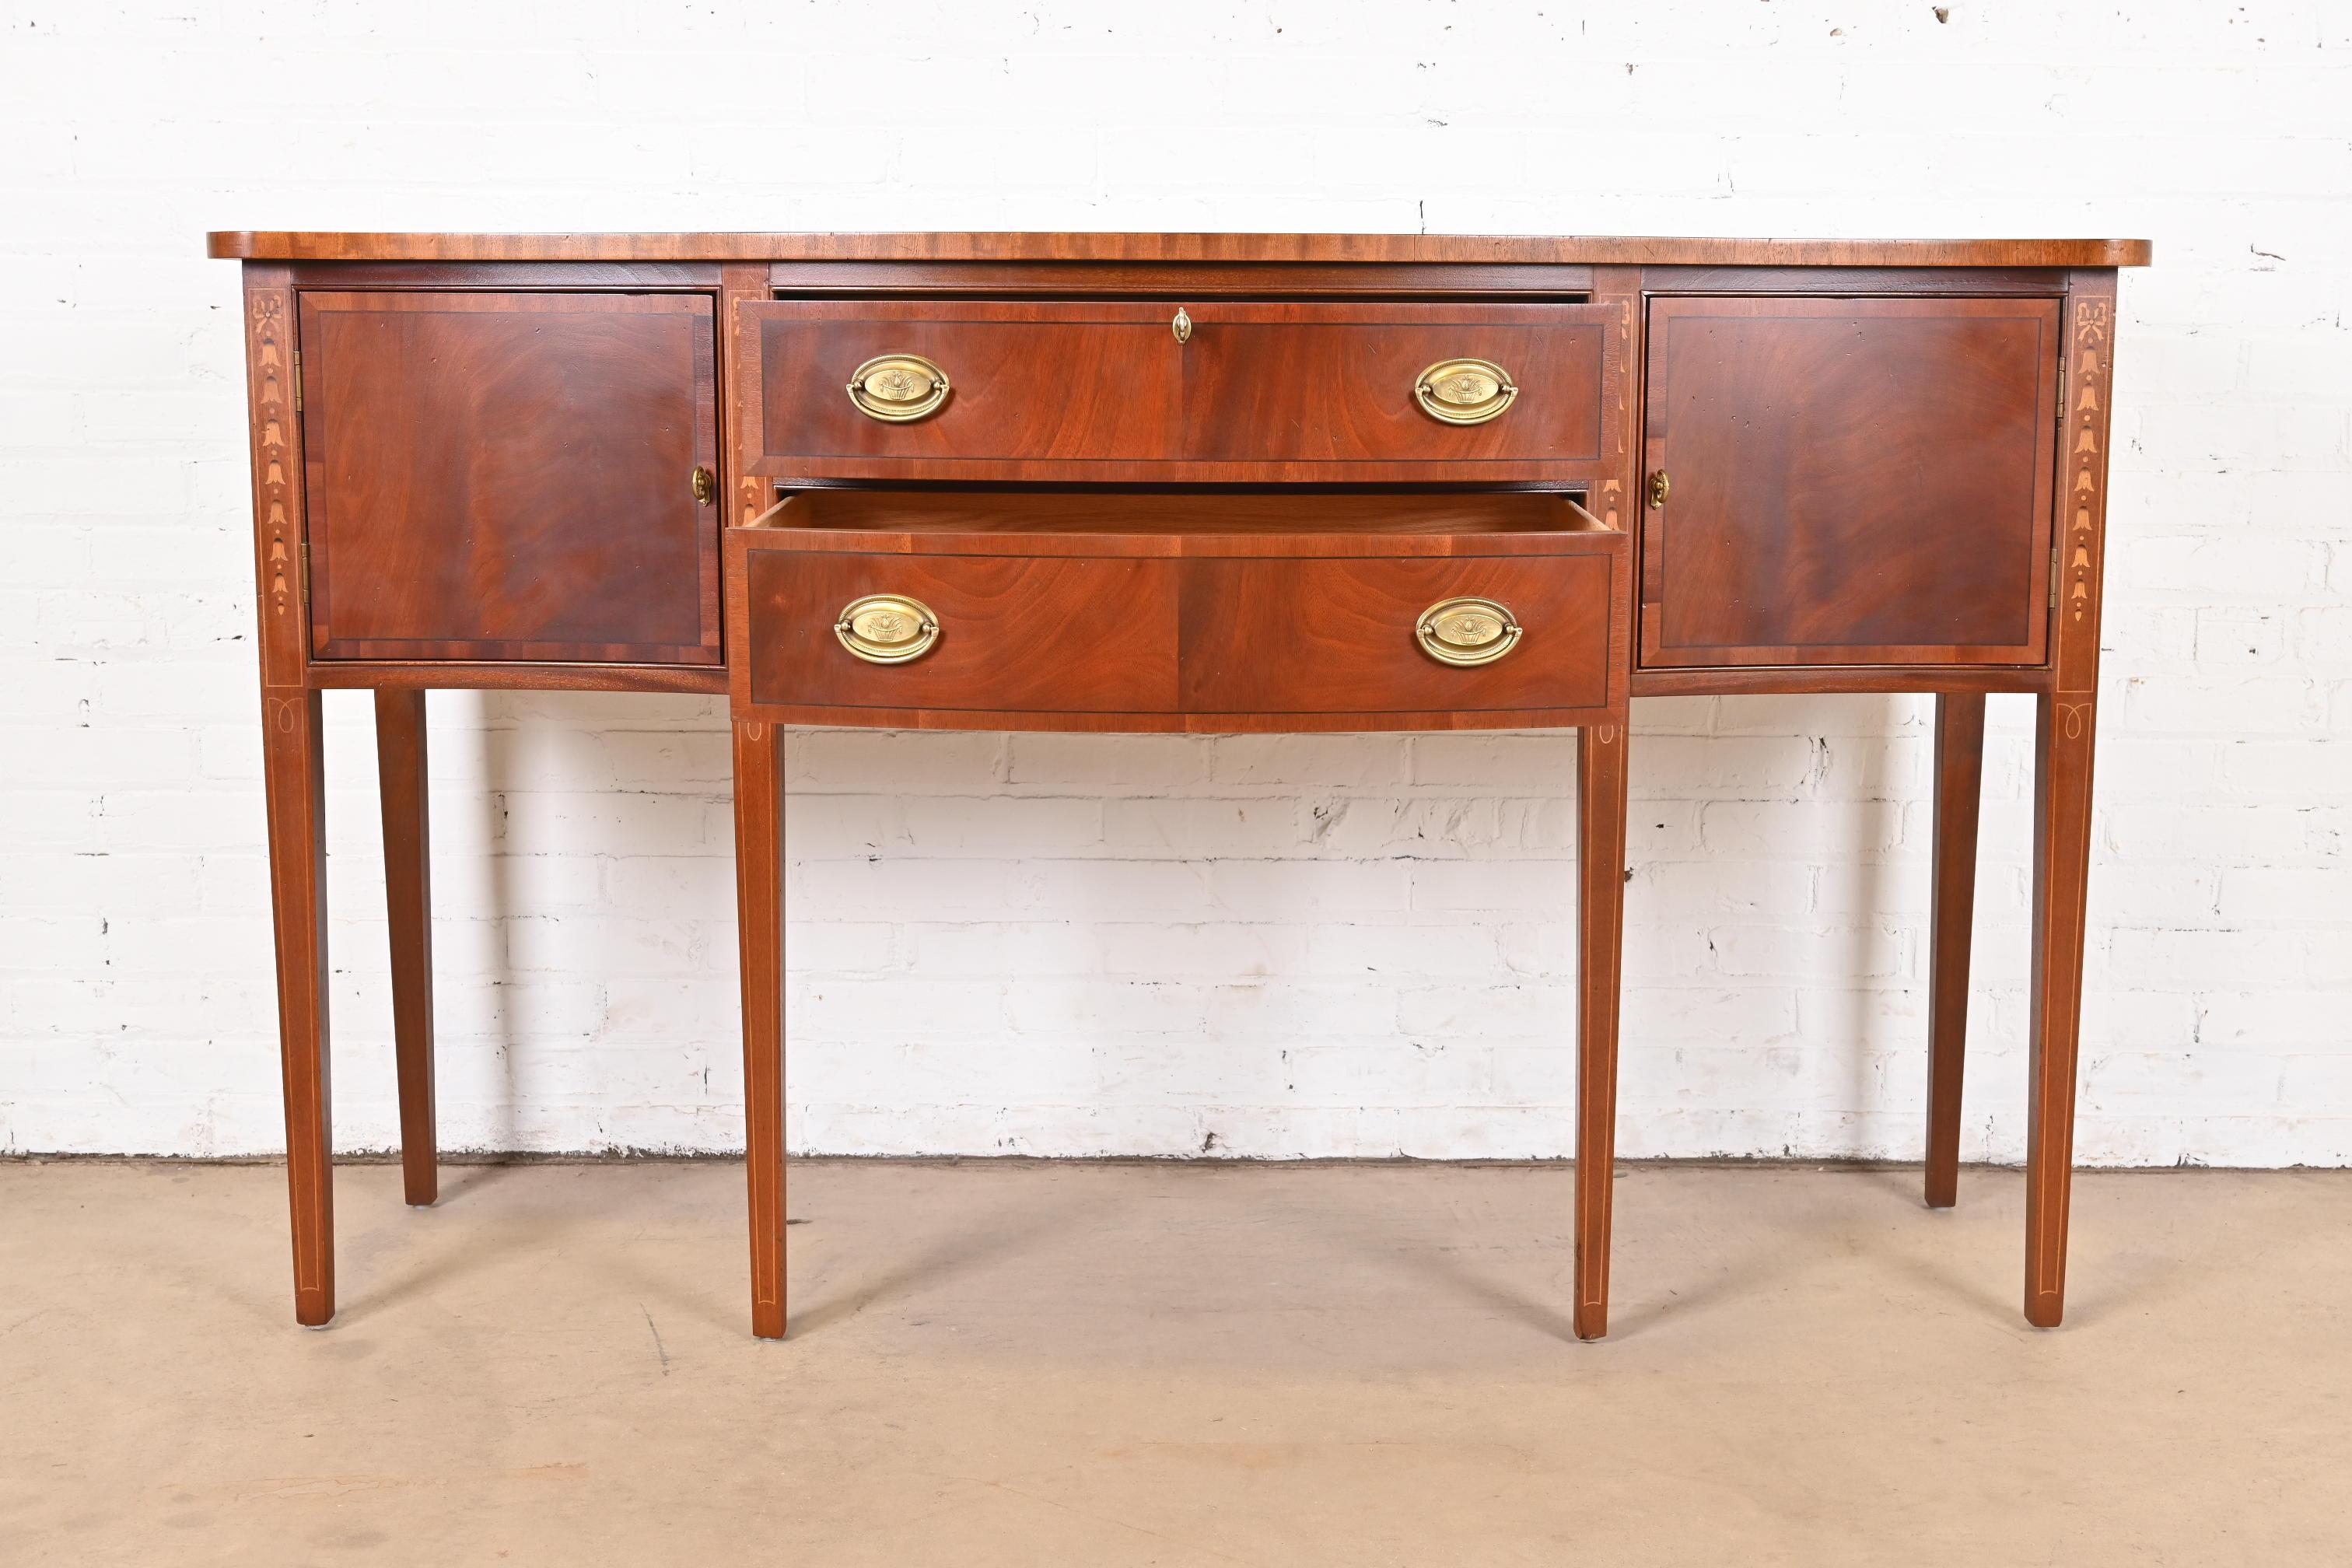 Hepplewhite Inlaid Mahogany Serpentine Front Sideboard Buffet or Credenza 2